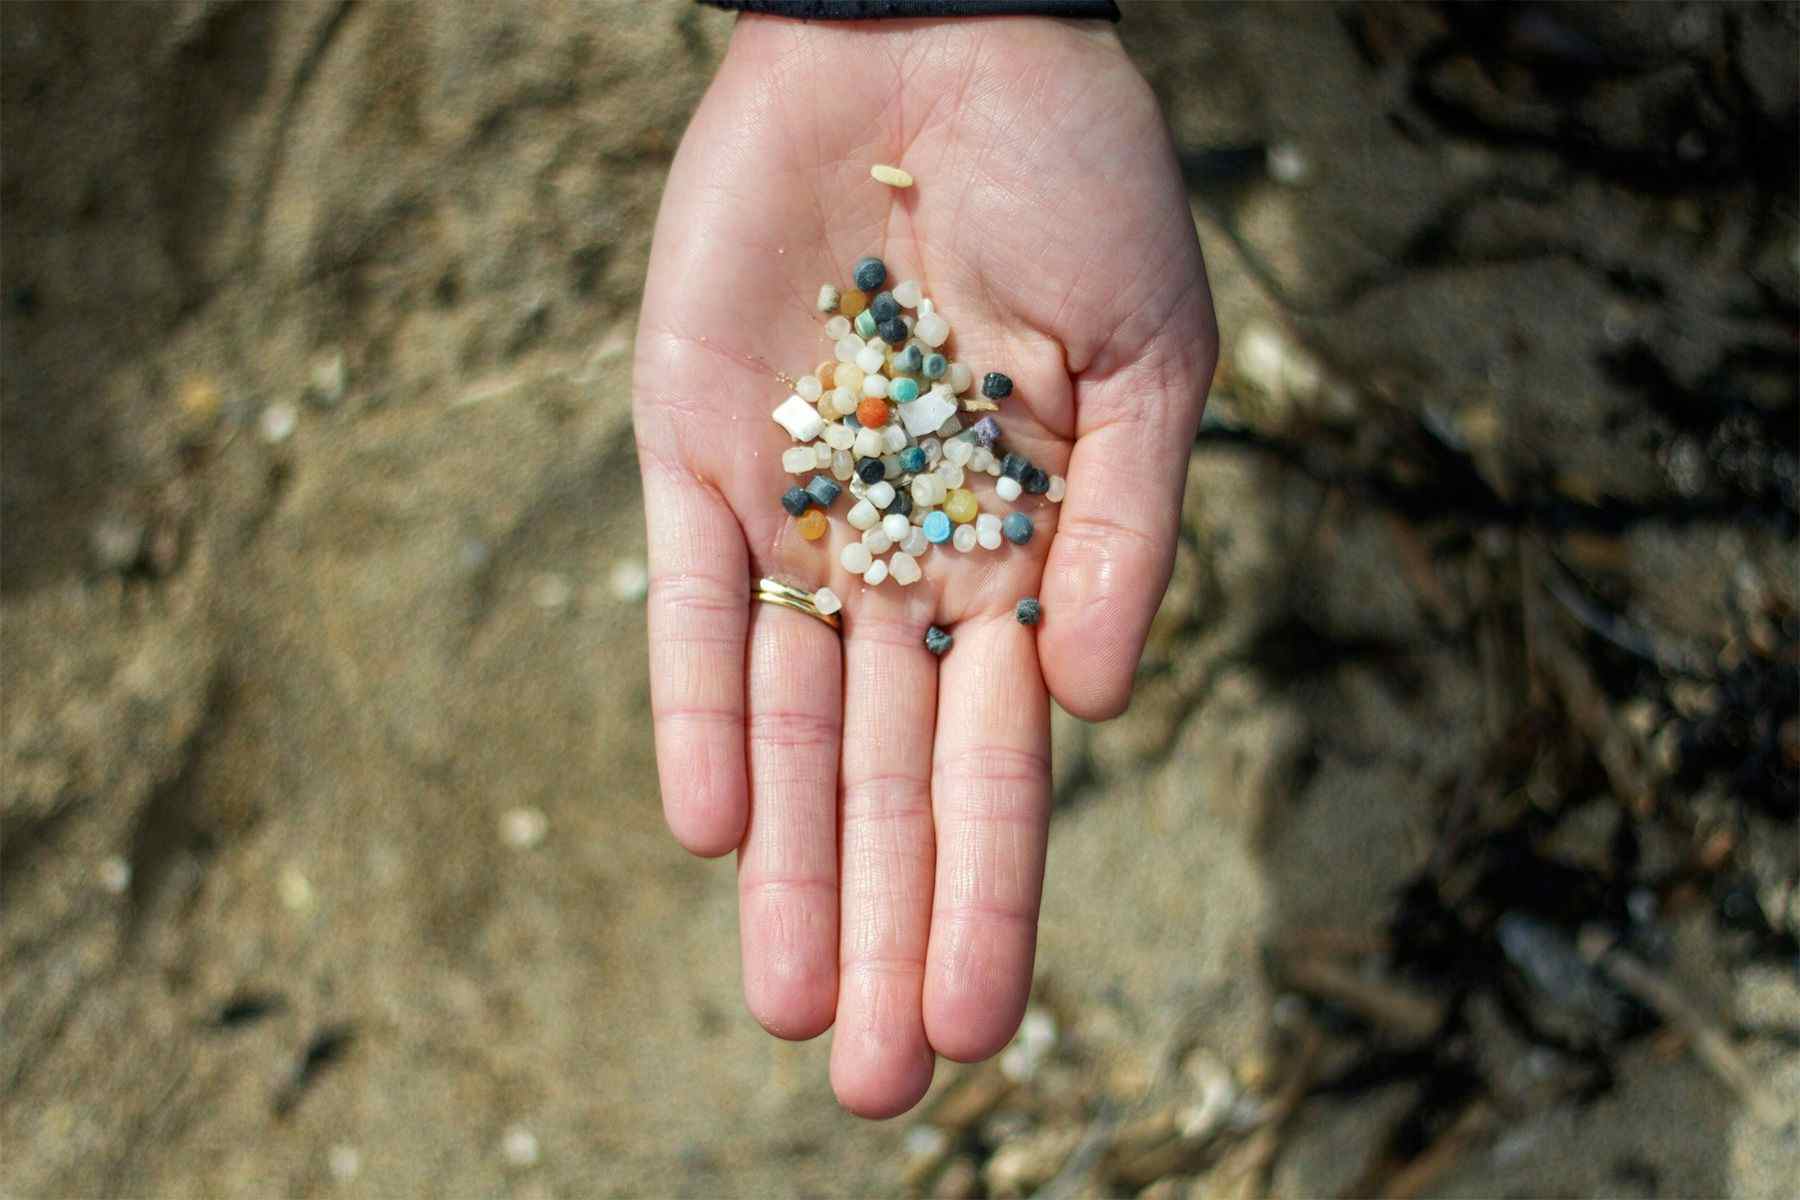 a handful of plastic nurdles collecting from a beach